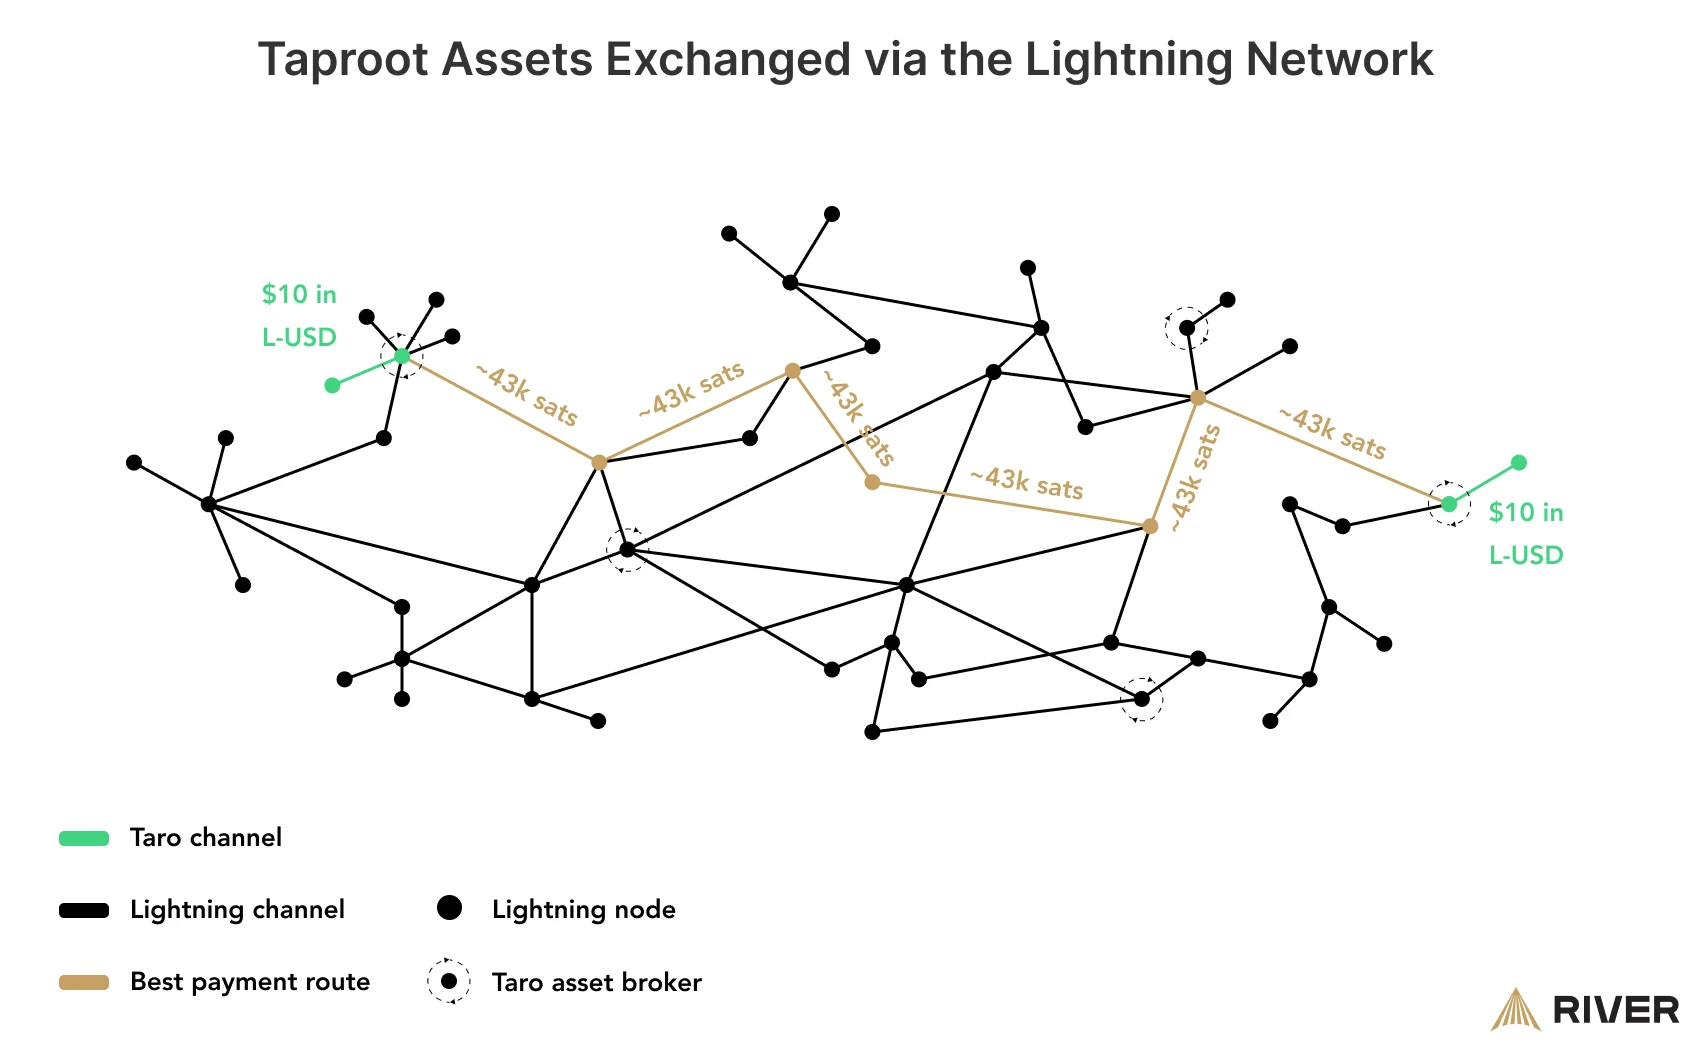 Taproot assets exchanged on the Lightning Network